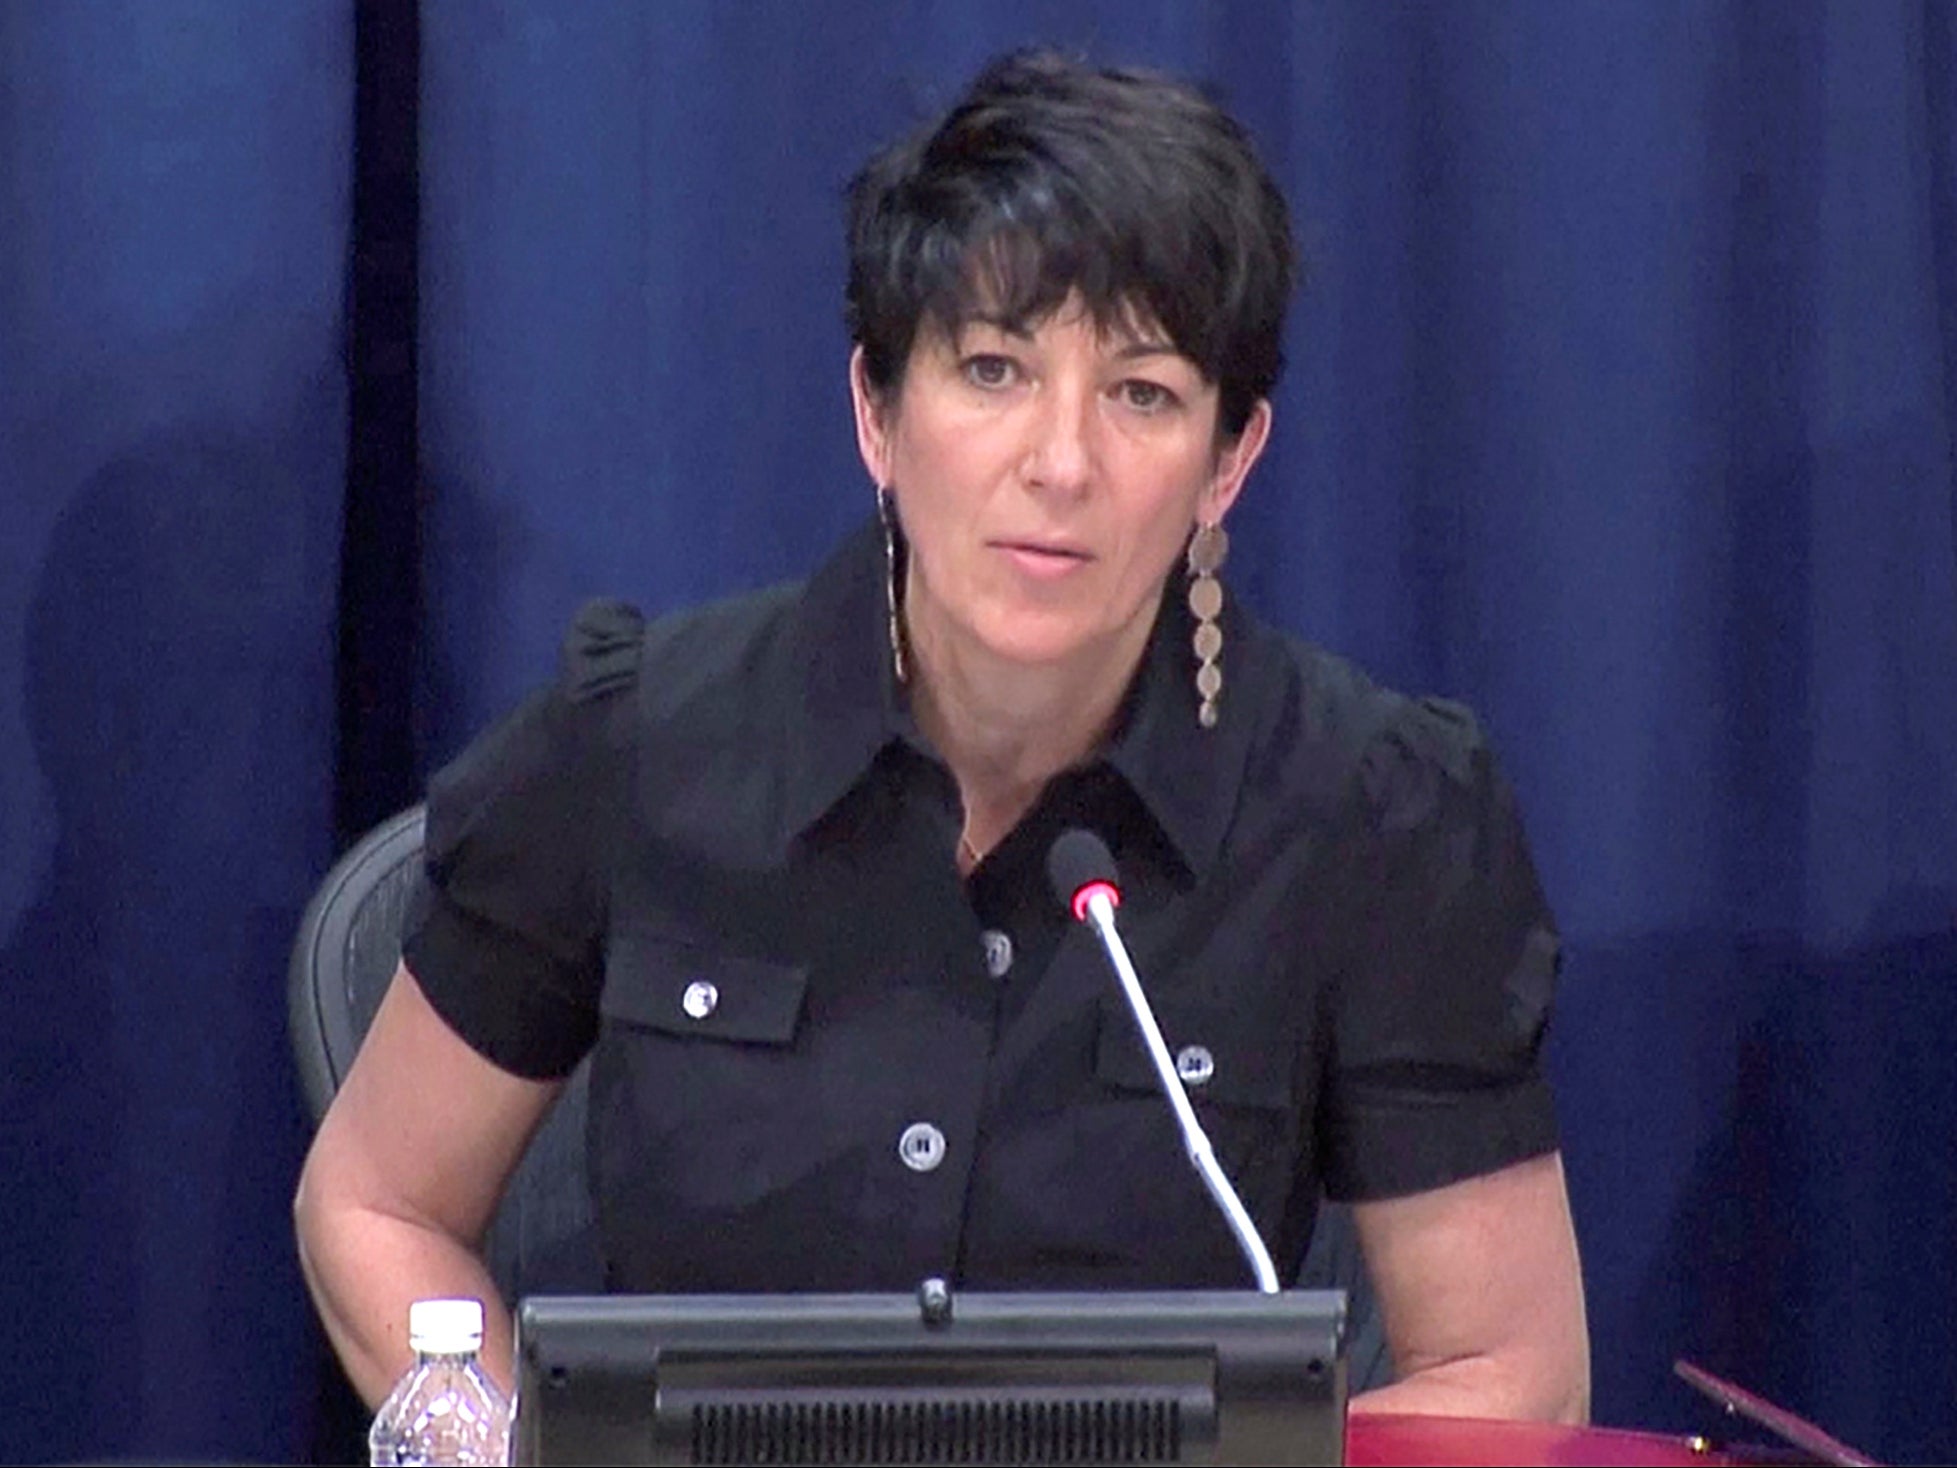 Ghislaine Maxwell has been put into quarantine after staff tested positive for Covid-19